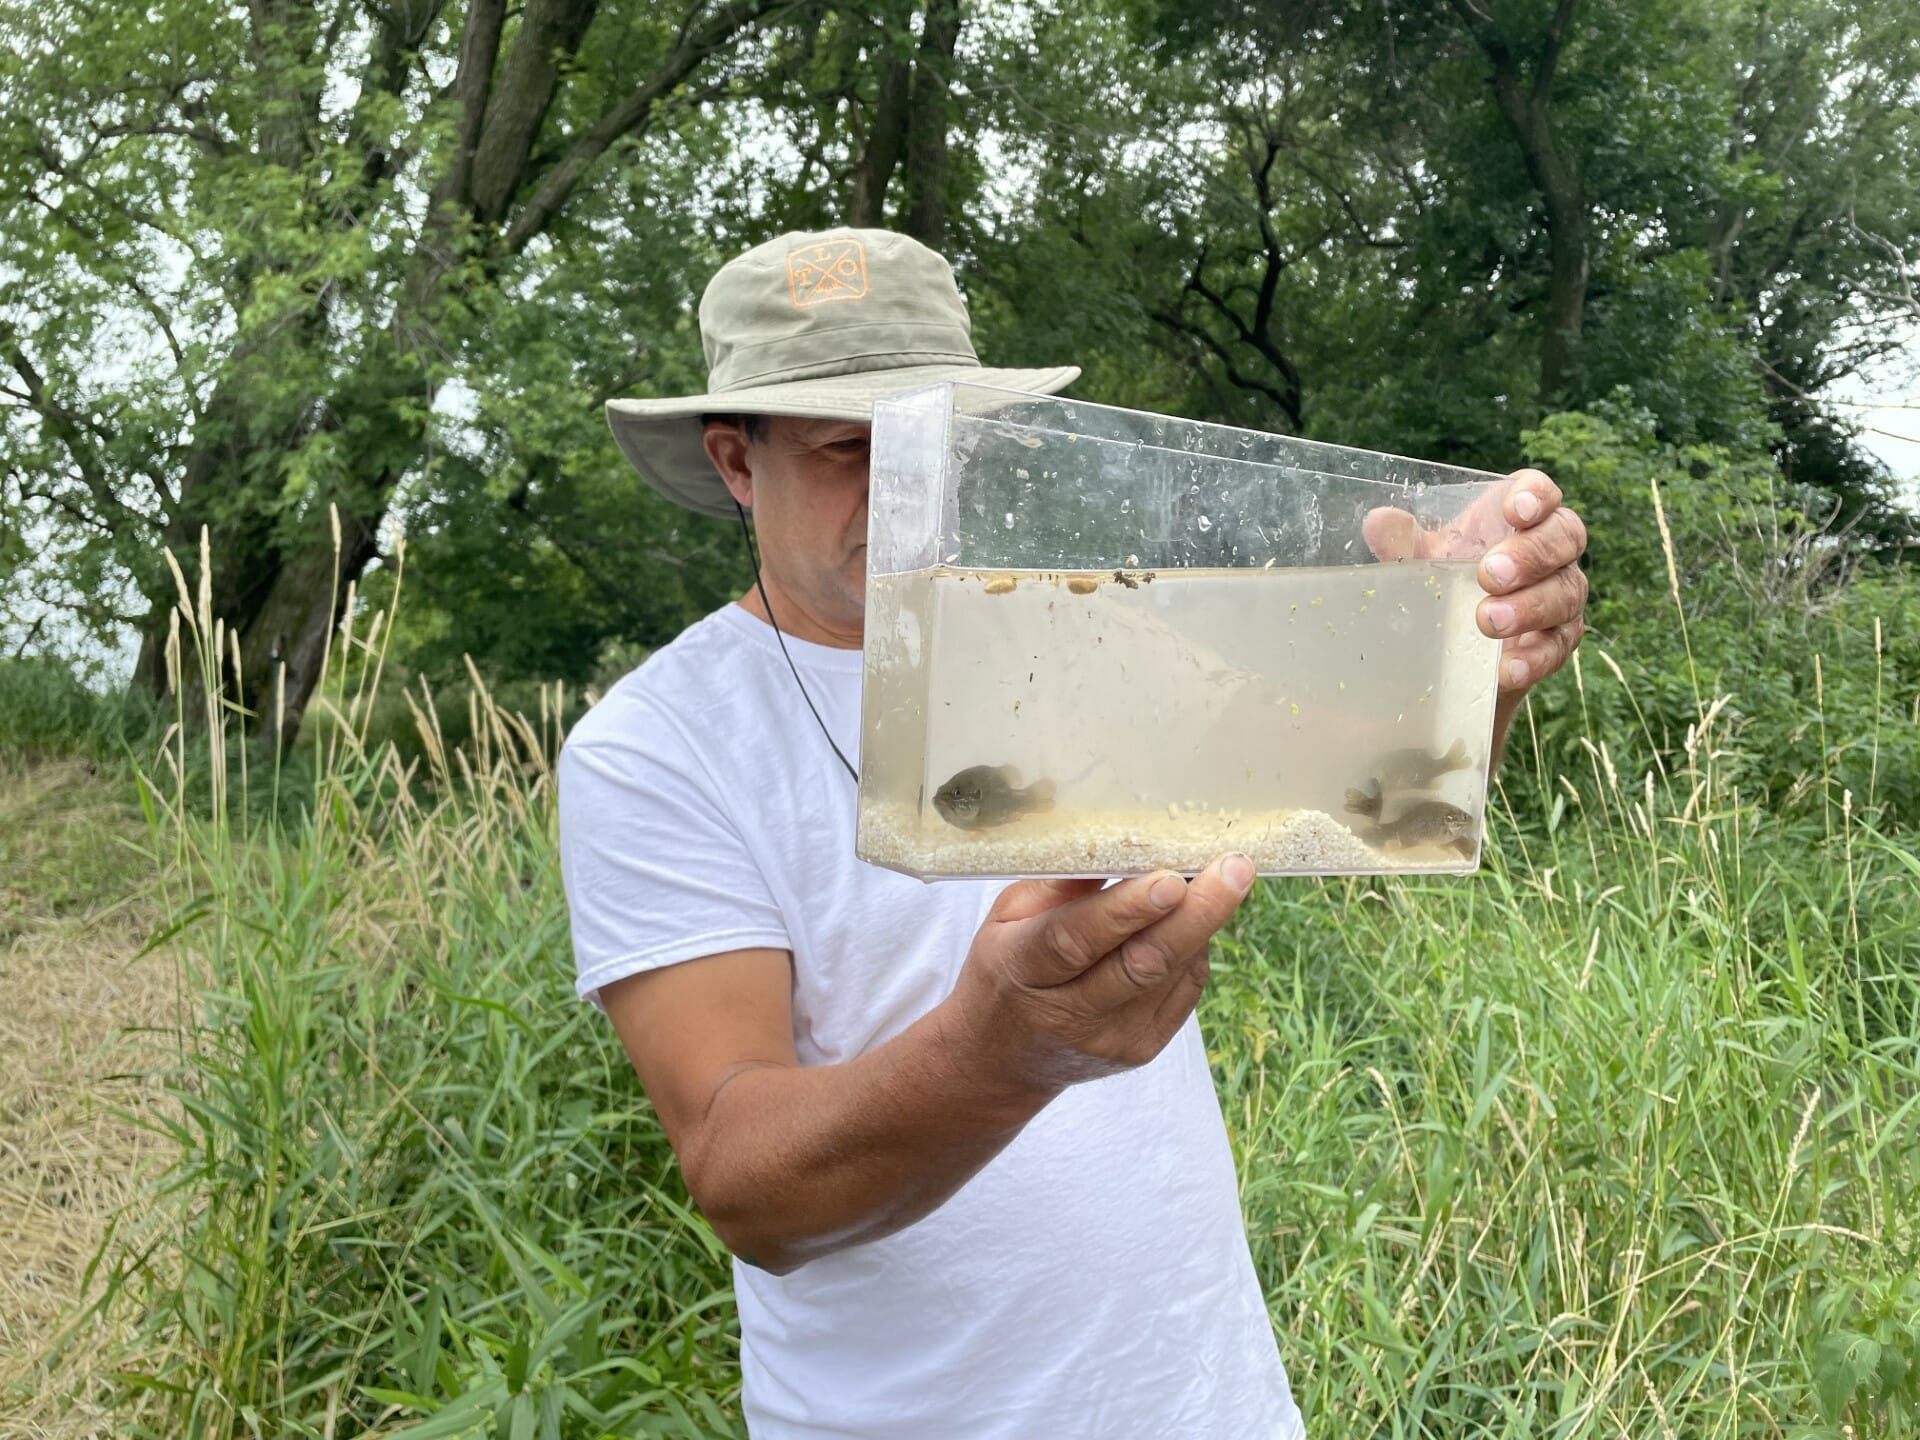 Minnows and sunfish found in Law farm oxbow